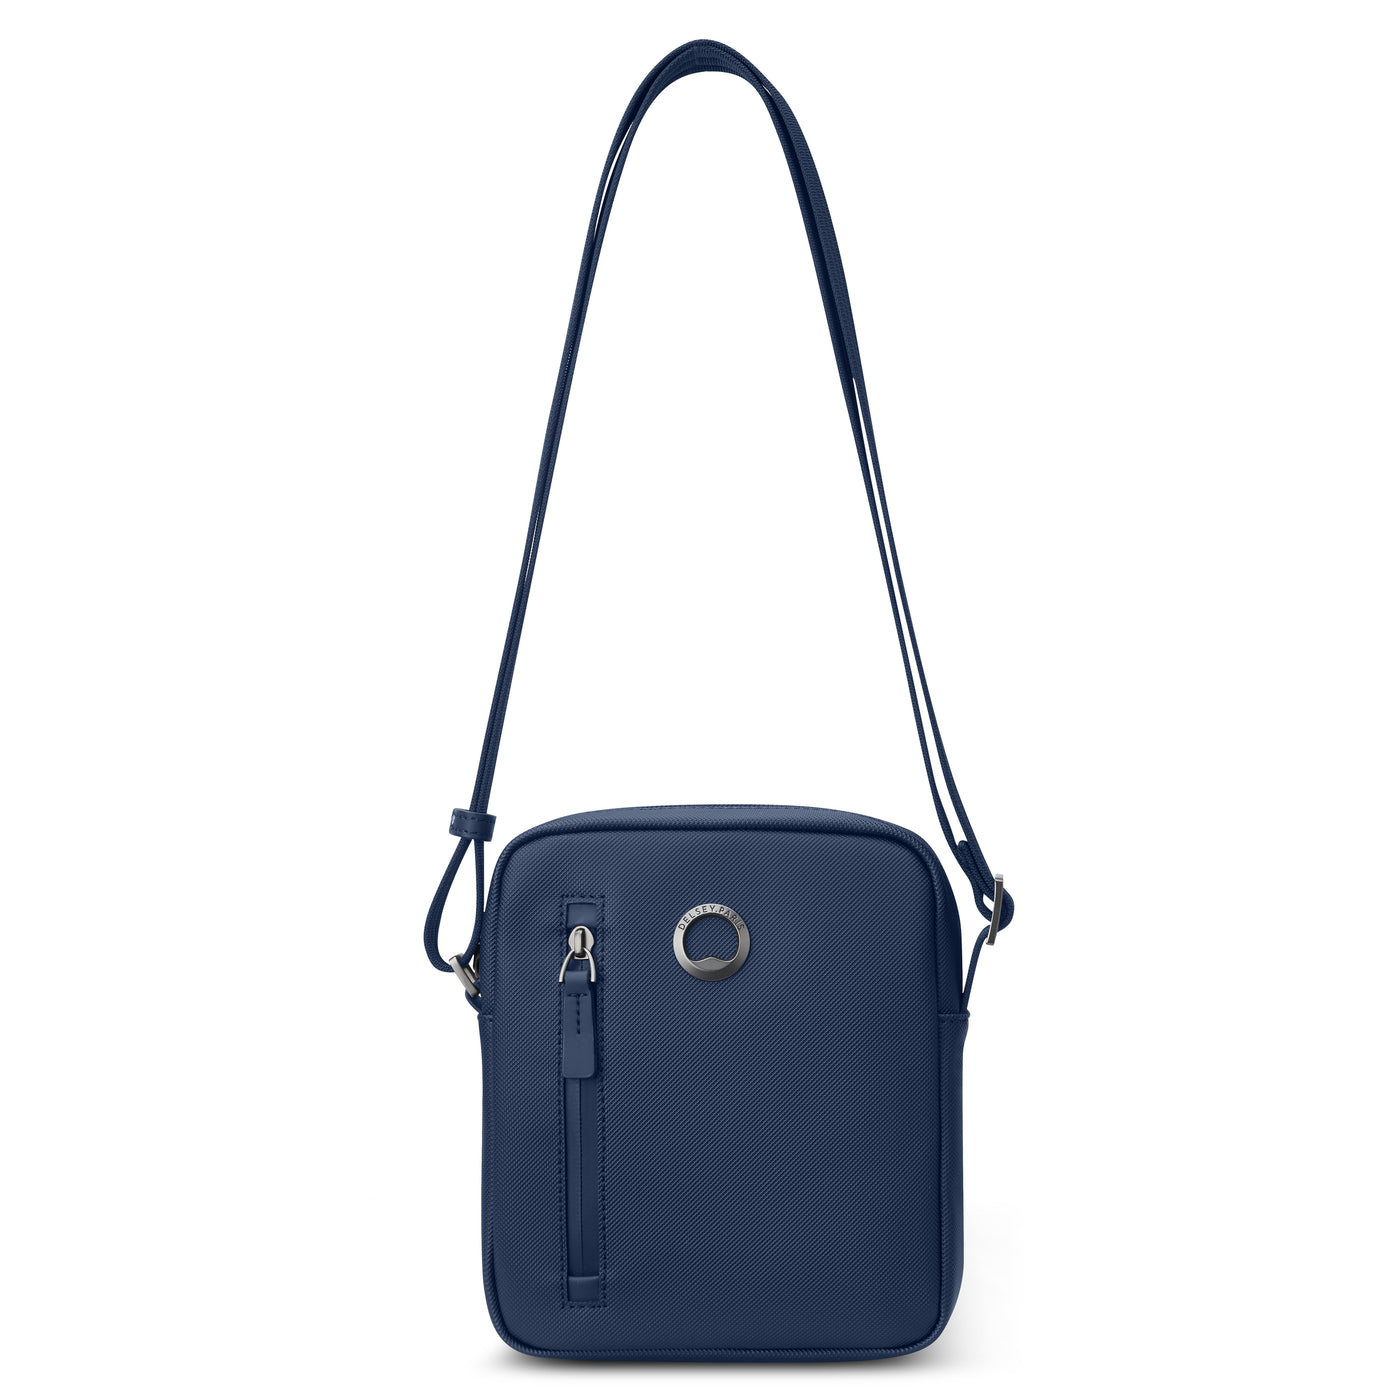 Shop The Latest Collection Of Delsey Lepic Vertical Bag M In Lebanon